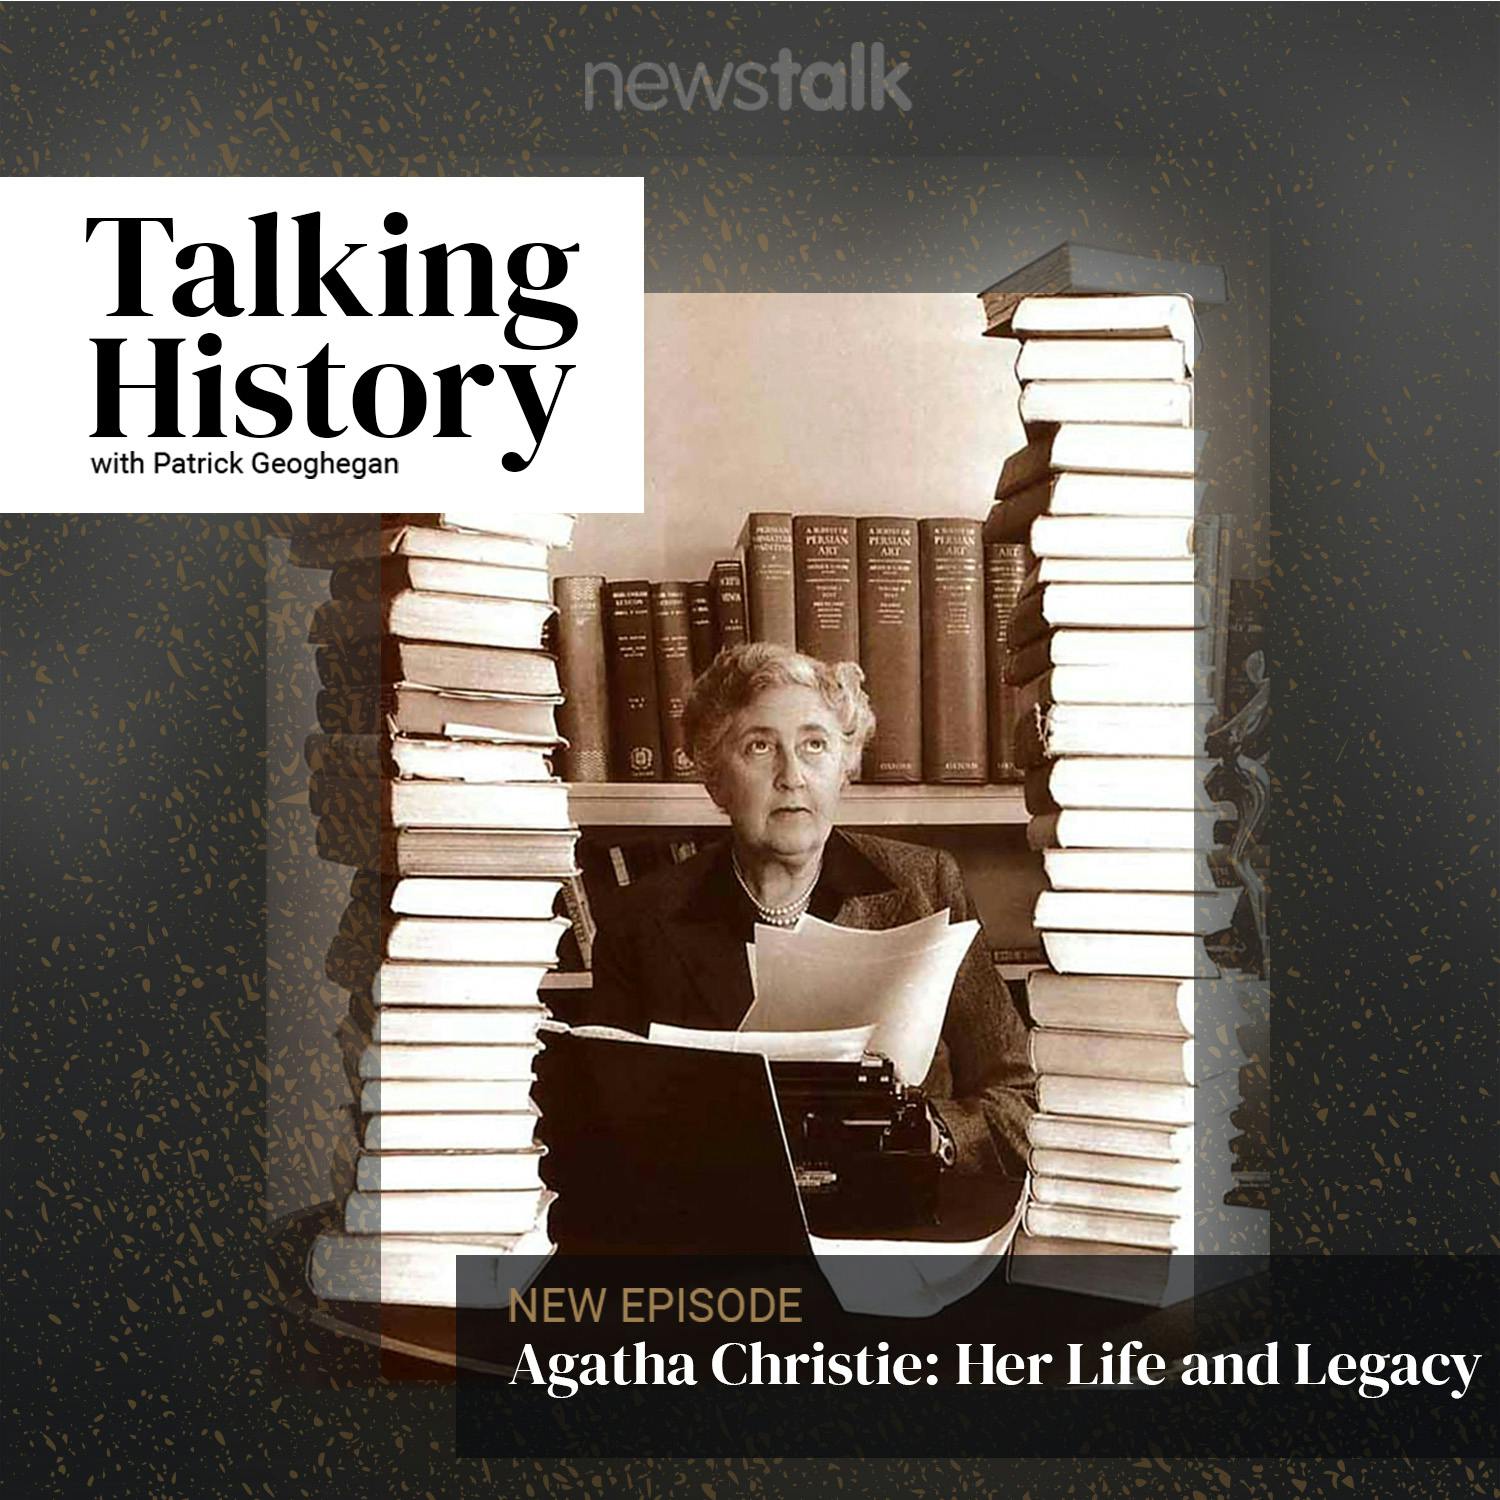 Agatha Christie: Her Life and Legacy, featuring Lucy Worsley